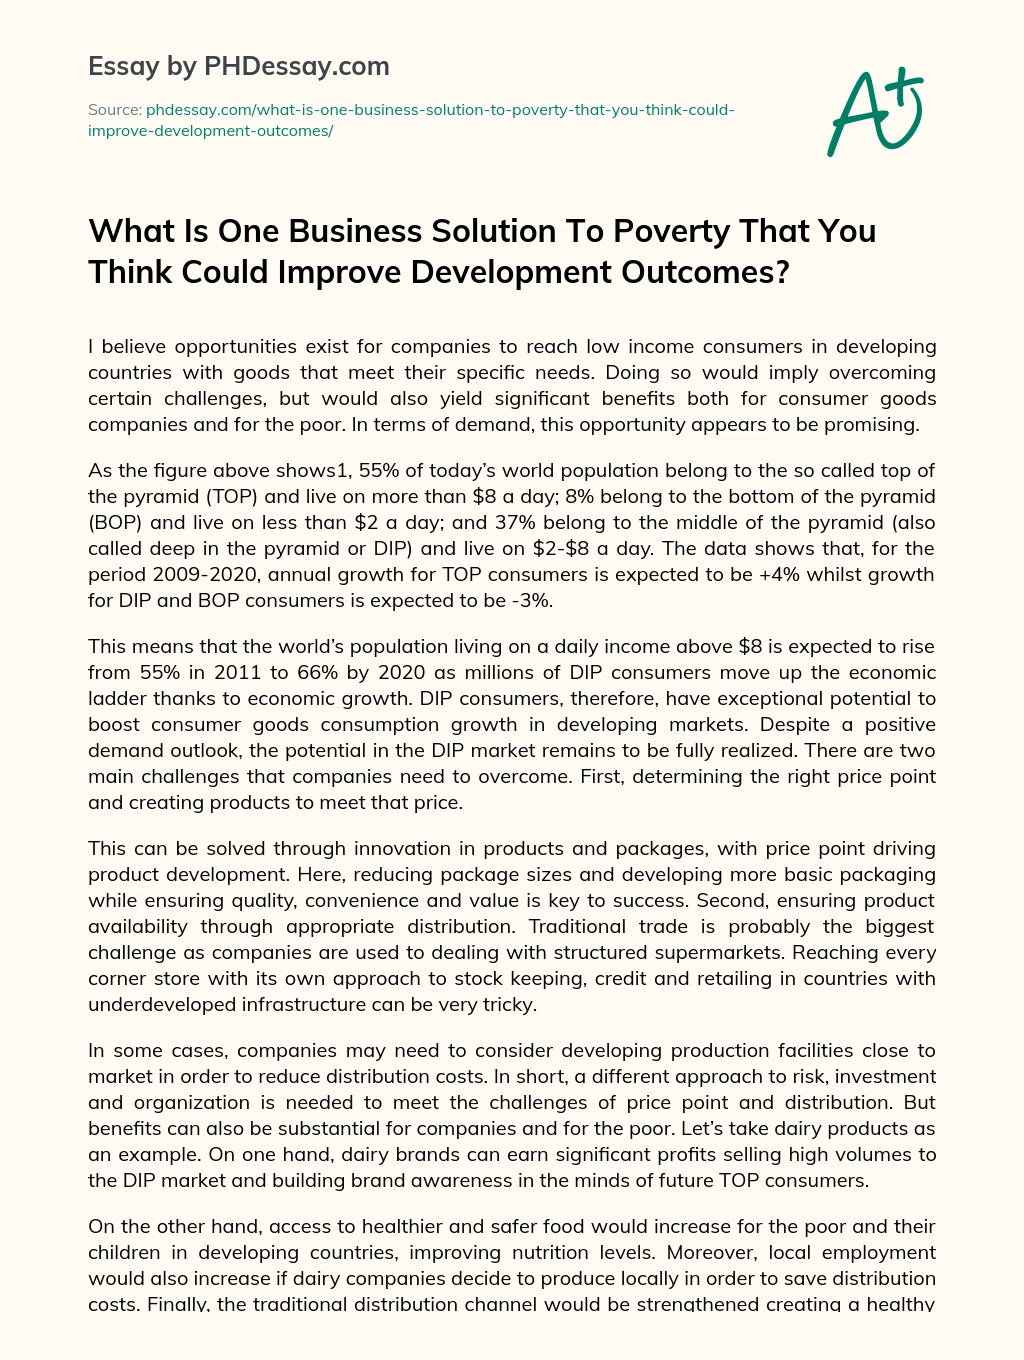 What Is One Business Solution To Poverty That You Think Could Improve Development Outcomes? essay